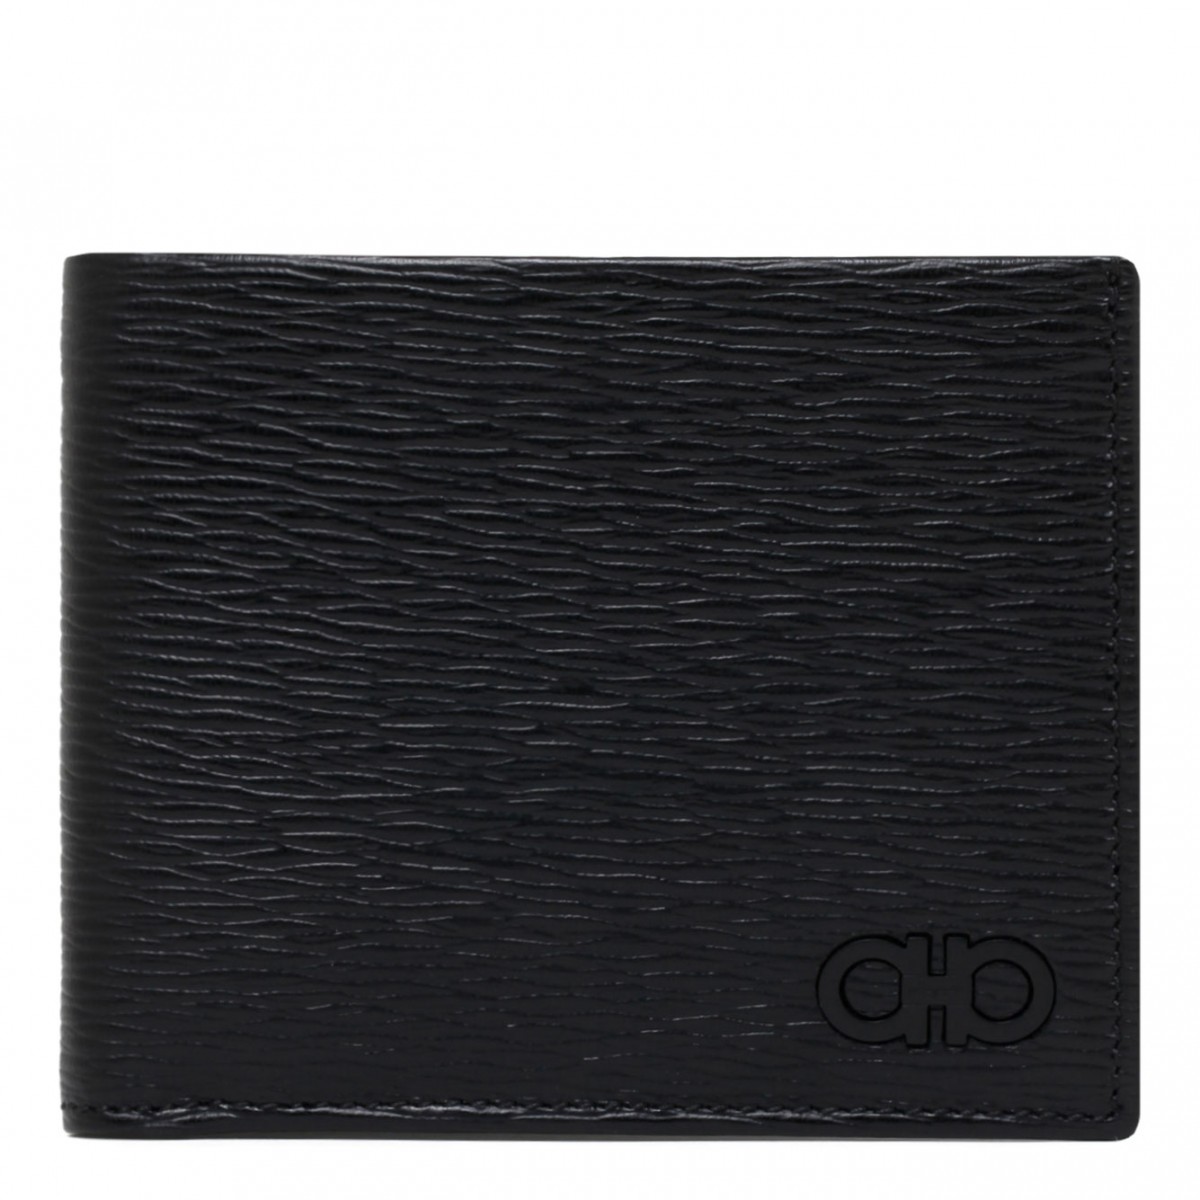 Grained Leather Black Wallet